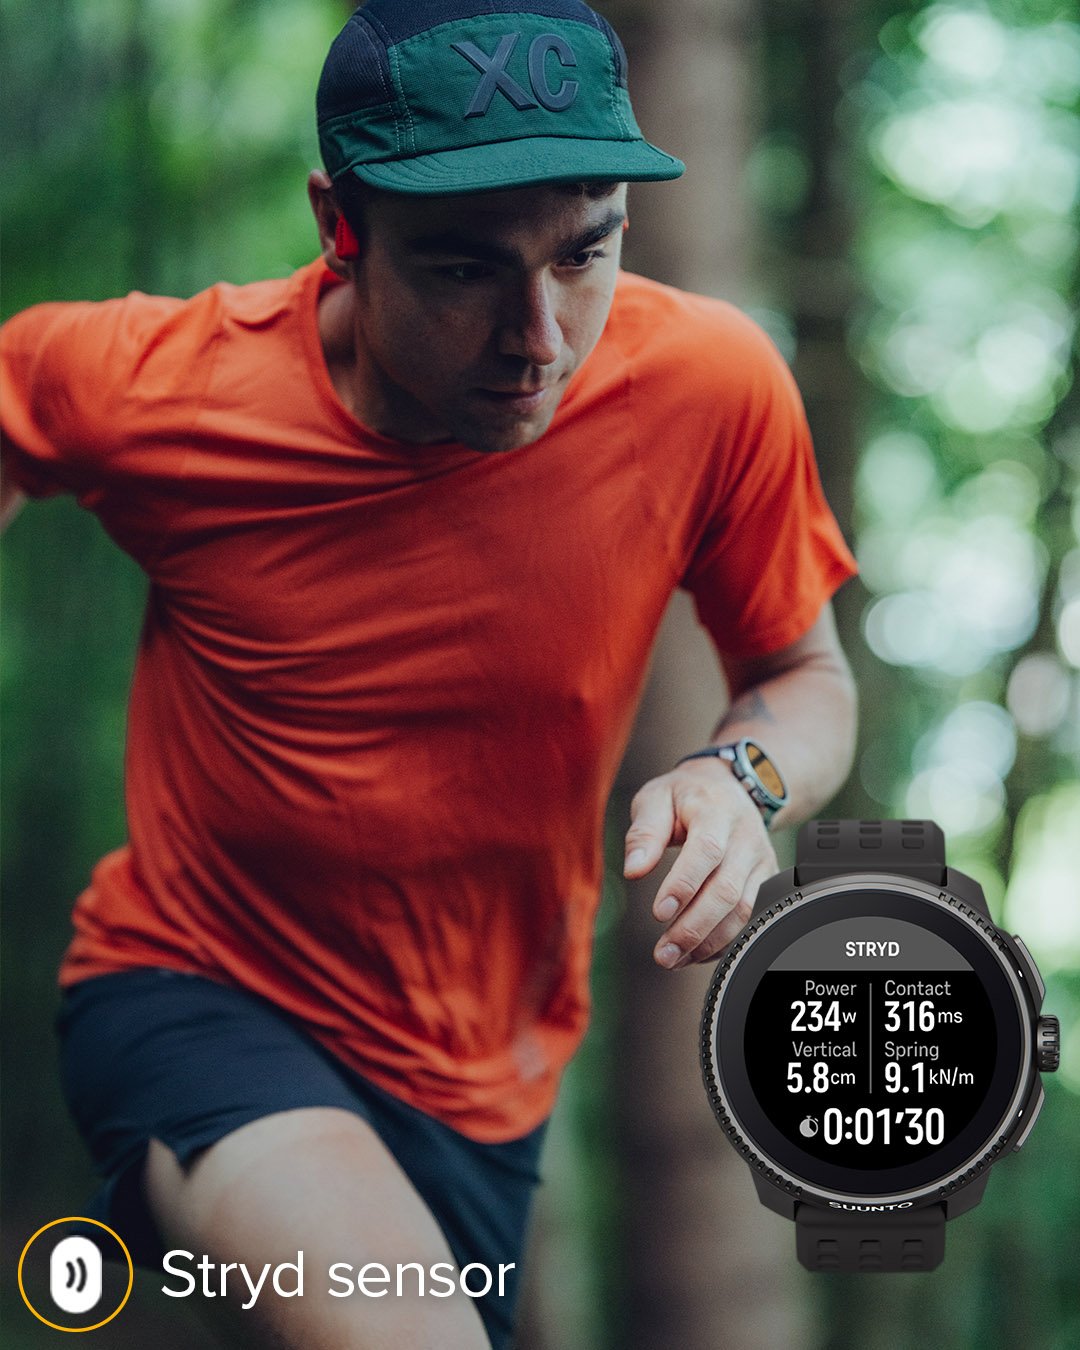 The new SuuntoPlus Stryd sport app shows you four key running metrics live during the workout and saves them for later analyses.